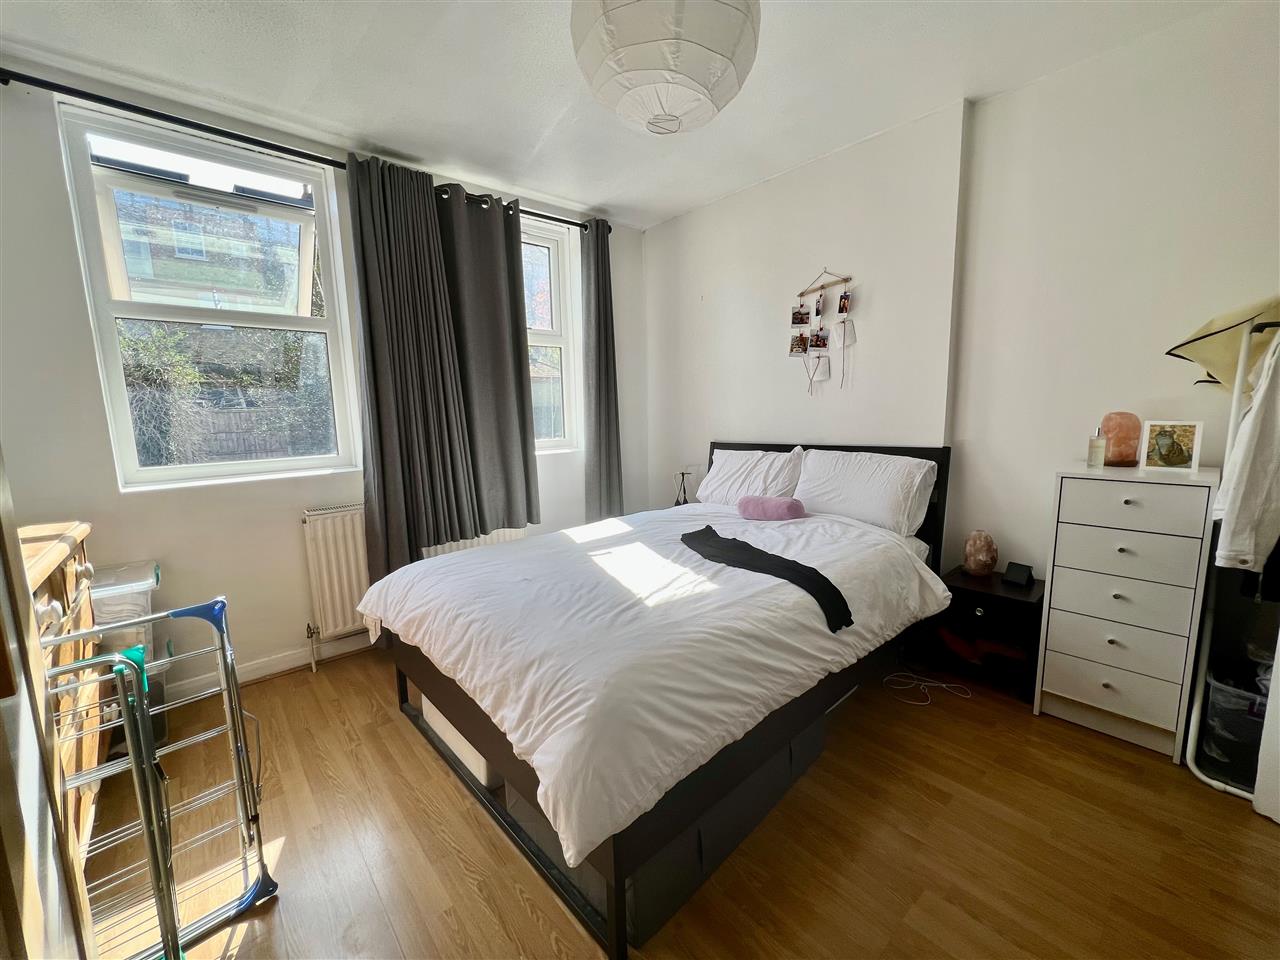 AVAILABLE IMMEDIATELY! A part furnished One Bedroom flat available to rent from 07/04/22. Located in the centre of Muswell Hill, the property has a good size living space with a large bay window which baths the room in natural light, galley kitchen and separate bathroom. With easy access to the ...